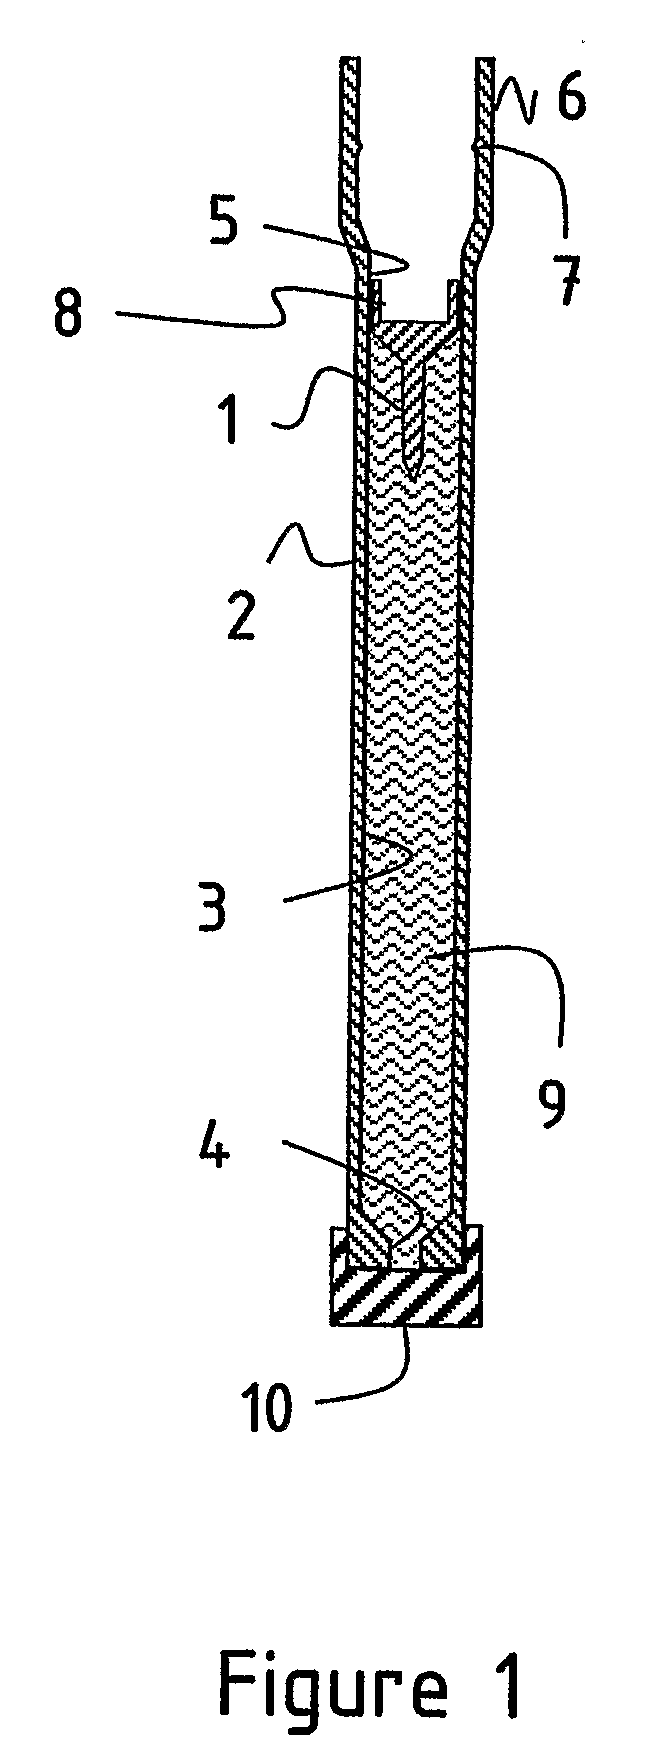 Method and apparatus for piercing the skin and delivery or collection of liquids